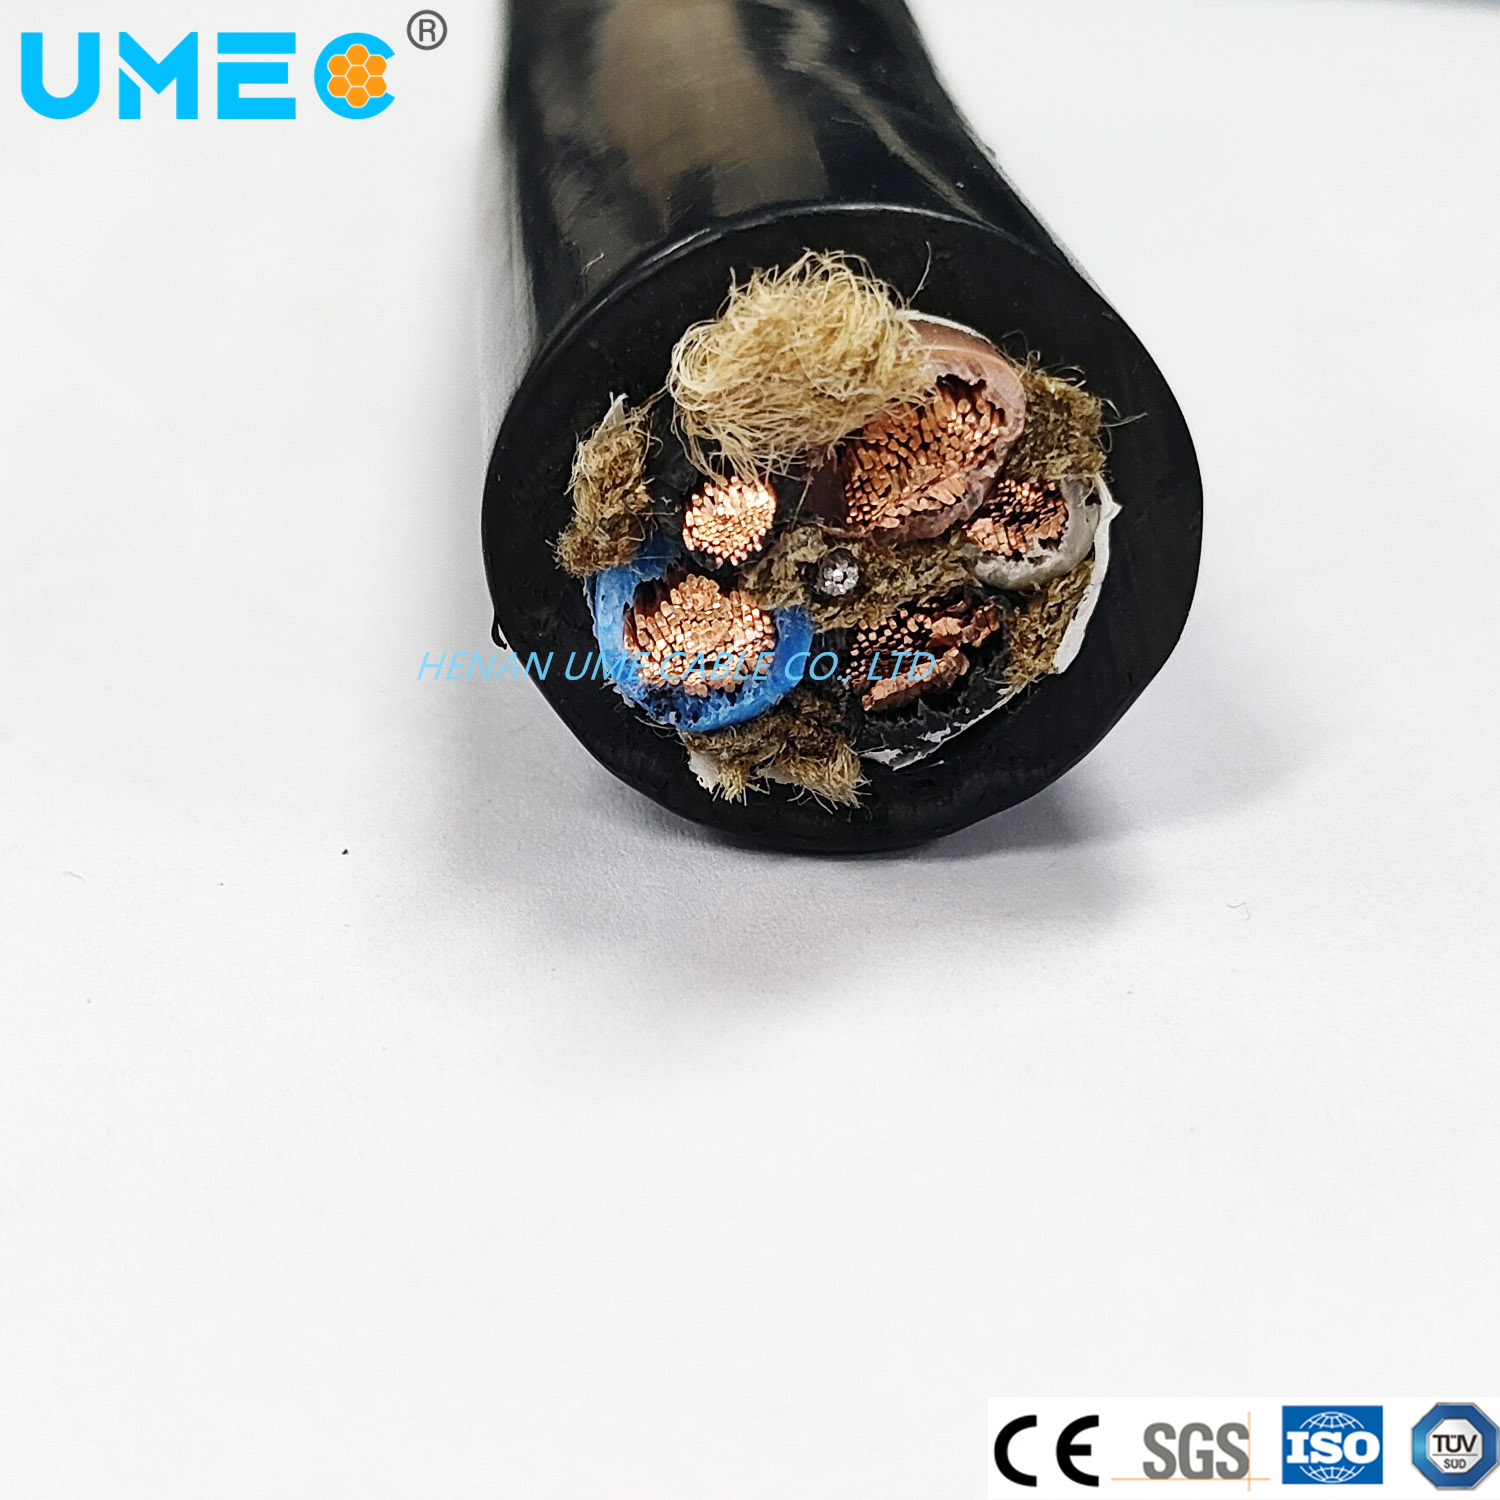 IEC Standard Rubber Epr CPE EPDM PVC Elastomer Insulation Cable 10 12 14 16mm2 Electrical Rubber Cable